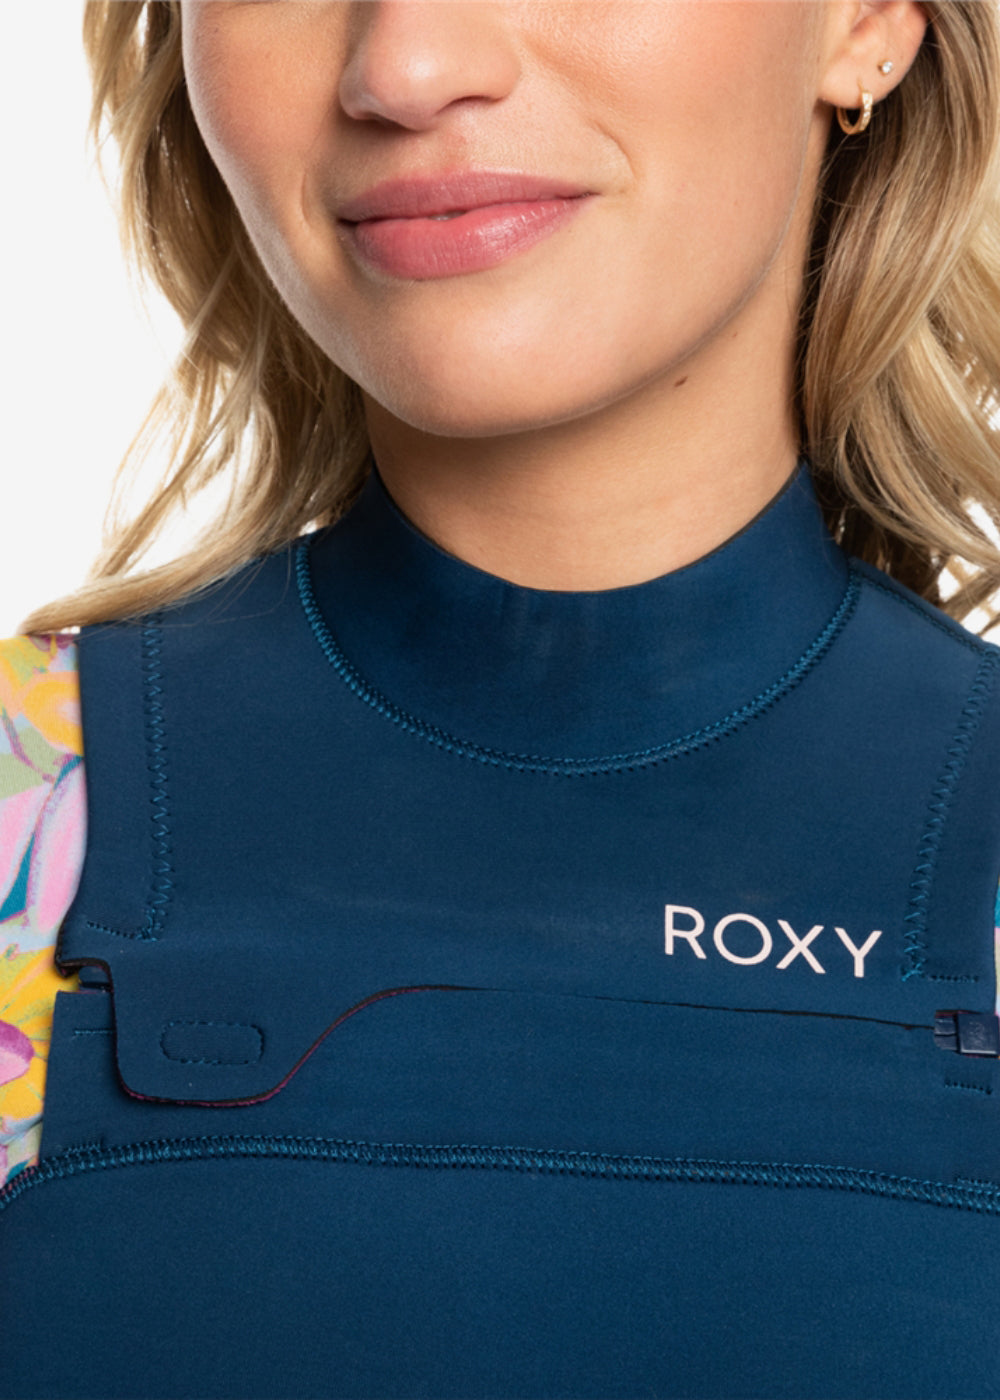 5/4/3mm Swell Series Chest Zip Wetsuit in Anthracite & Hot Tropics by Roxy